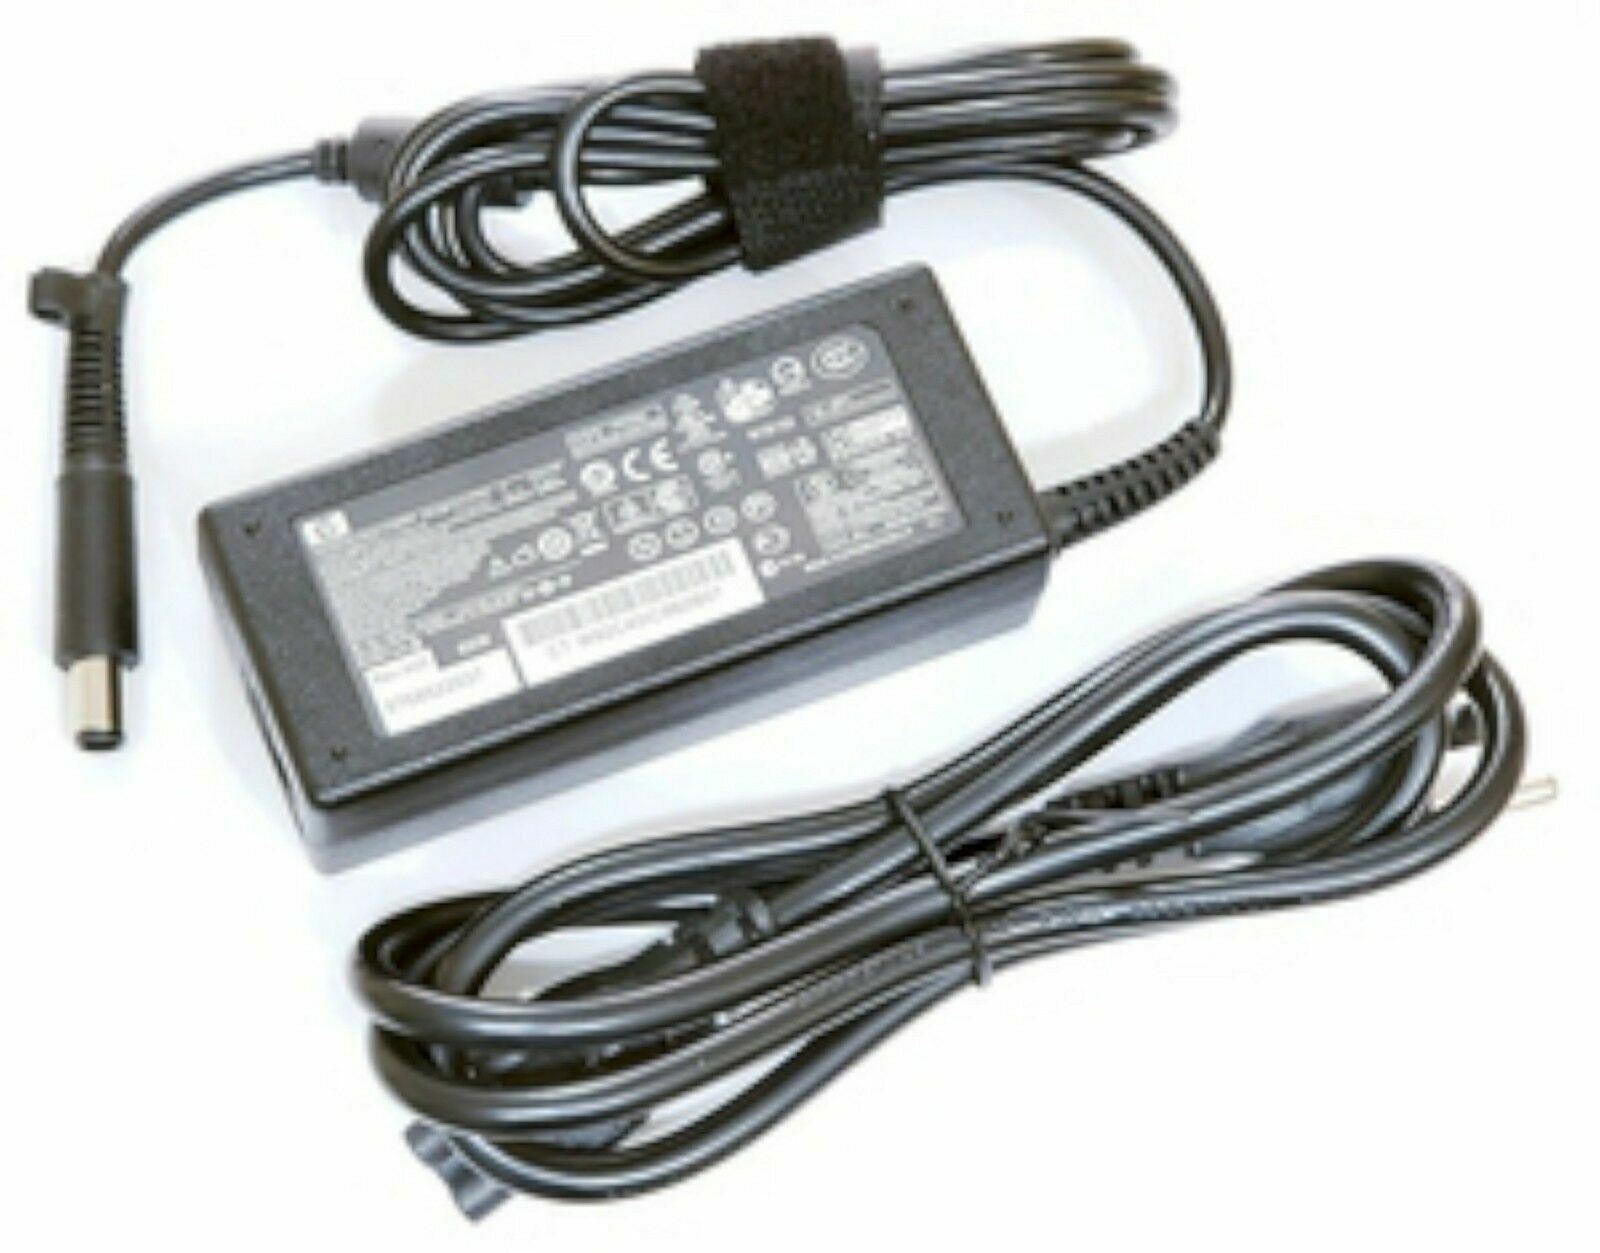 Primary image for Genuine HP 65W 18.5V AC Adapter Charger 577051-001 Power Supply OEM Cord Compaq